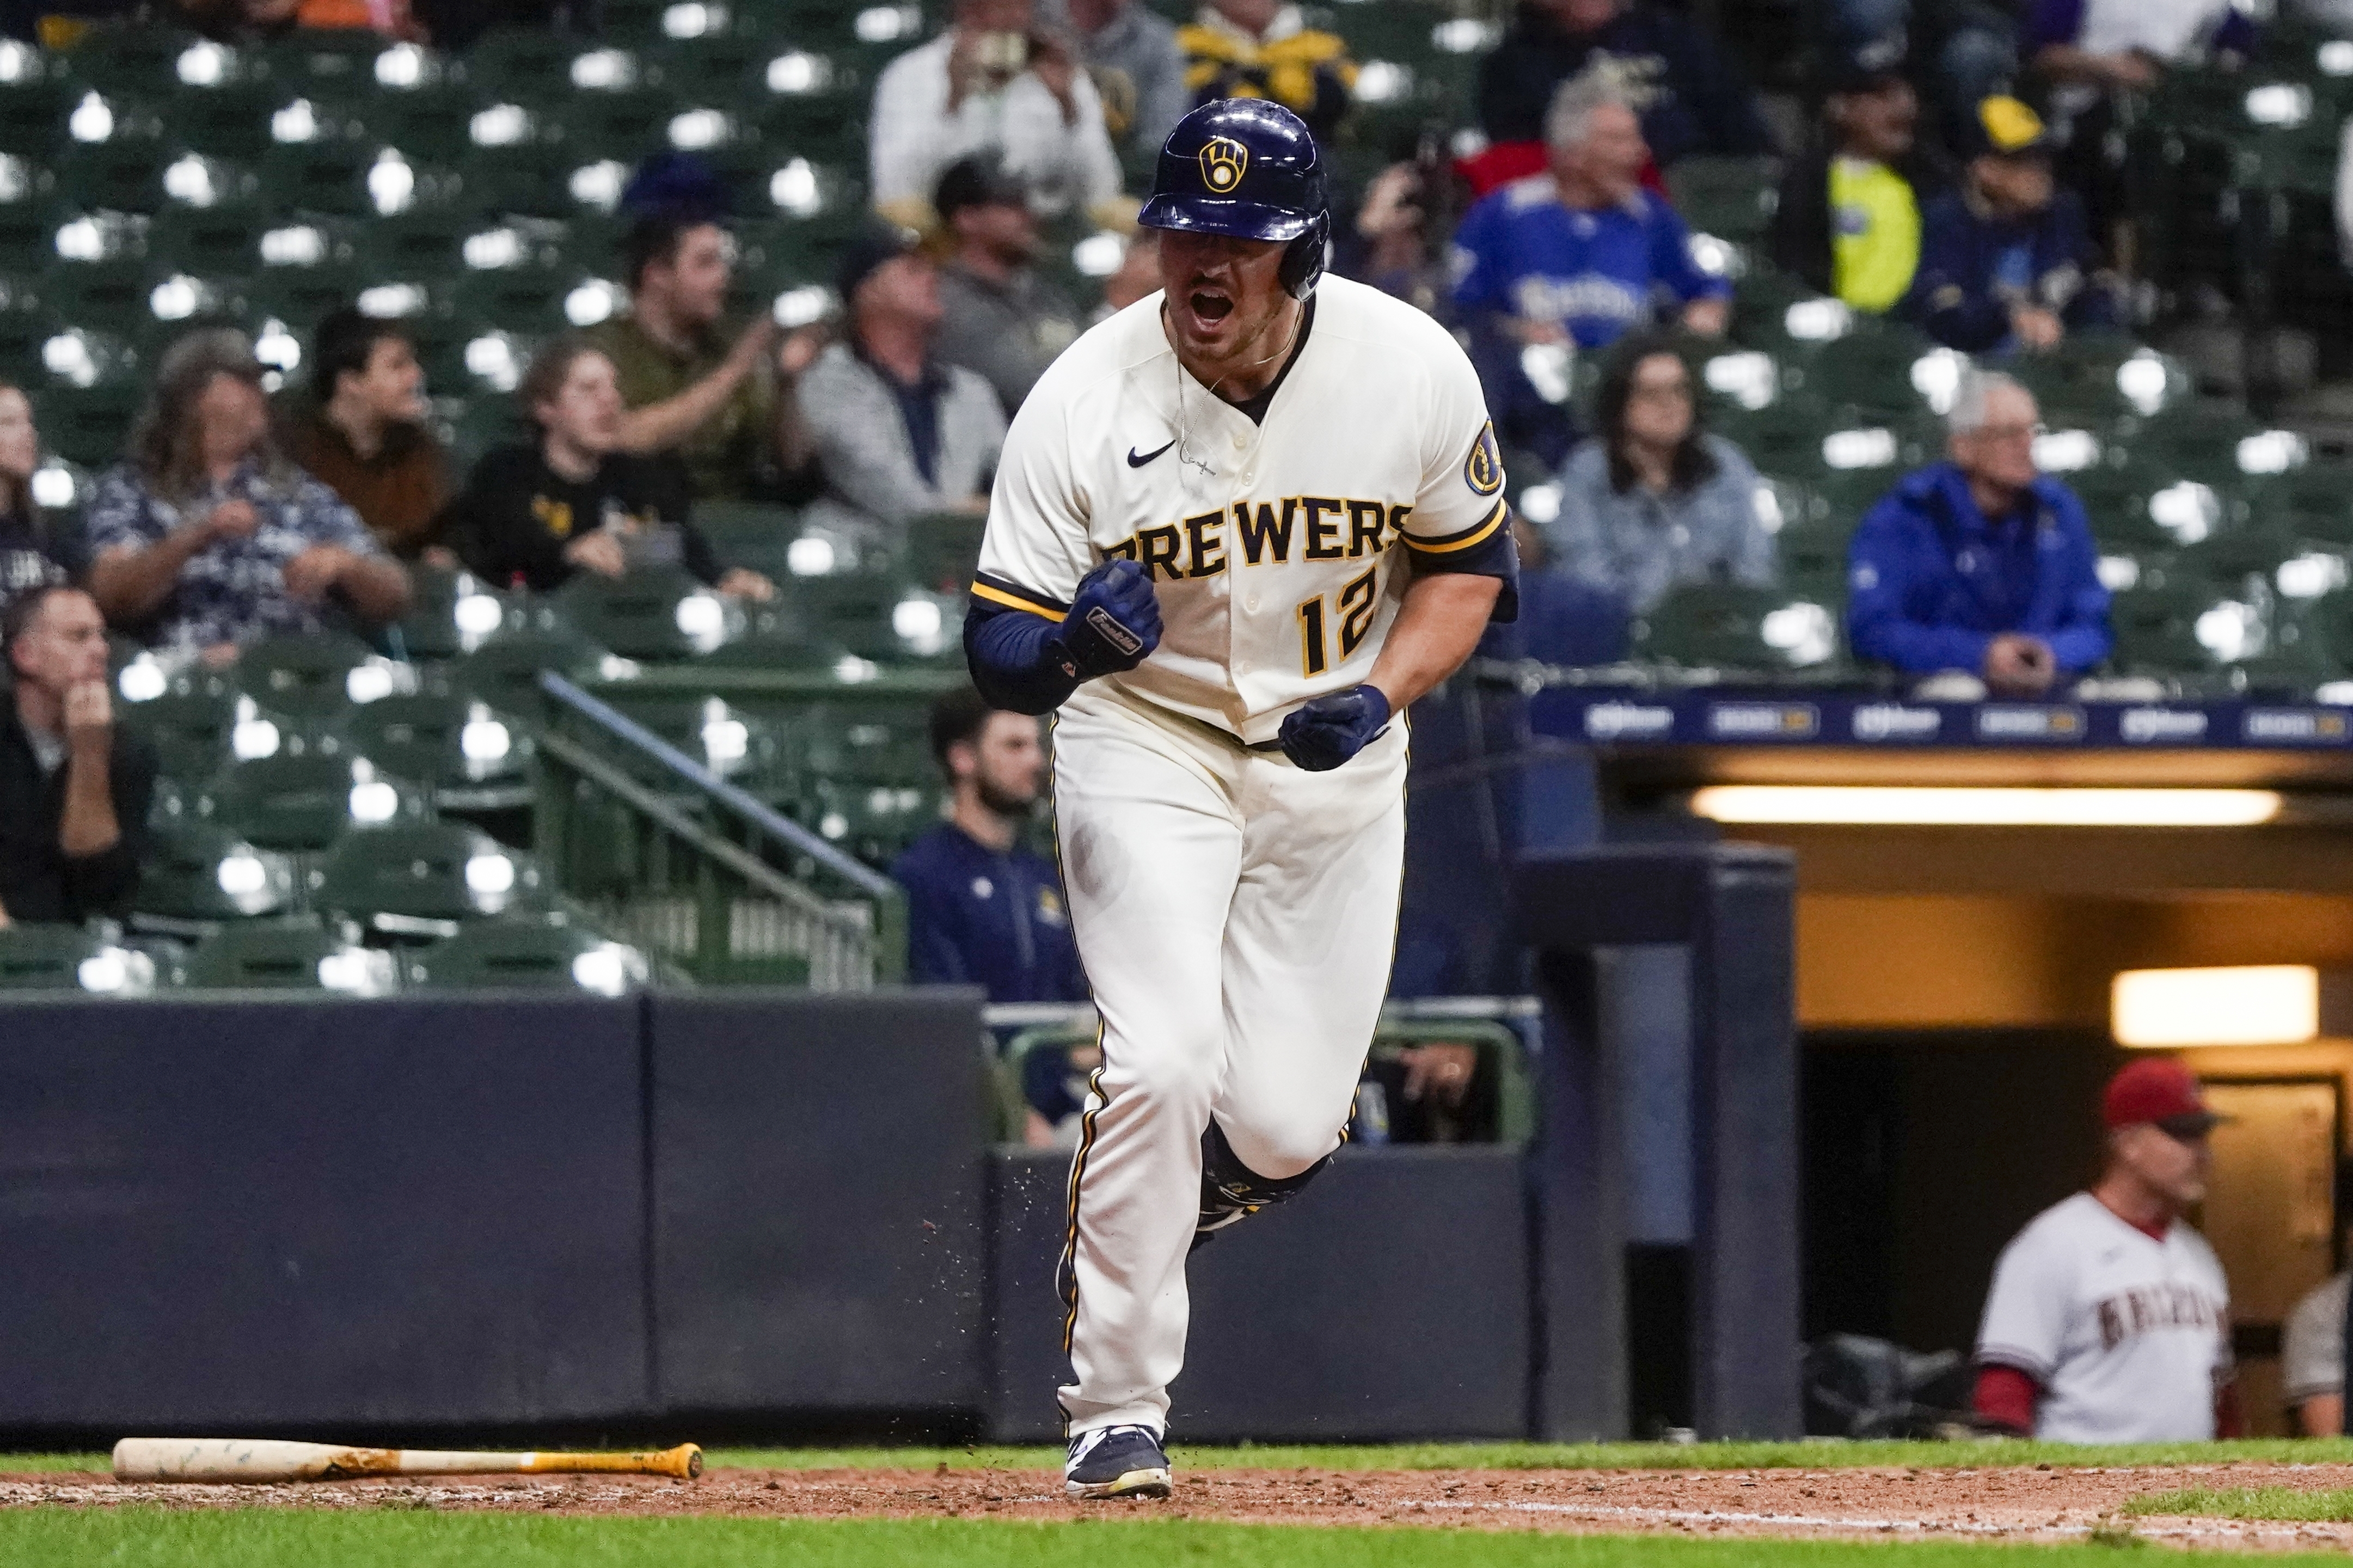 Hunter Renfroe Stats: A look at the new Angels player's 2022 stats